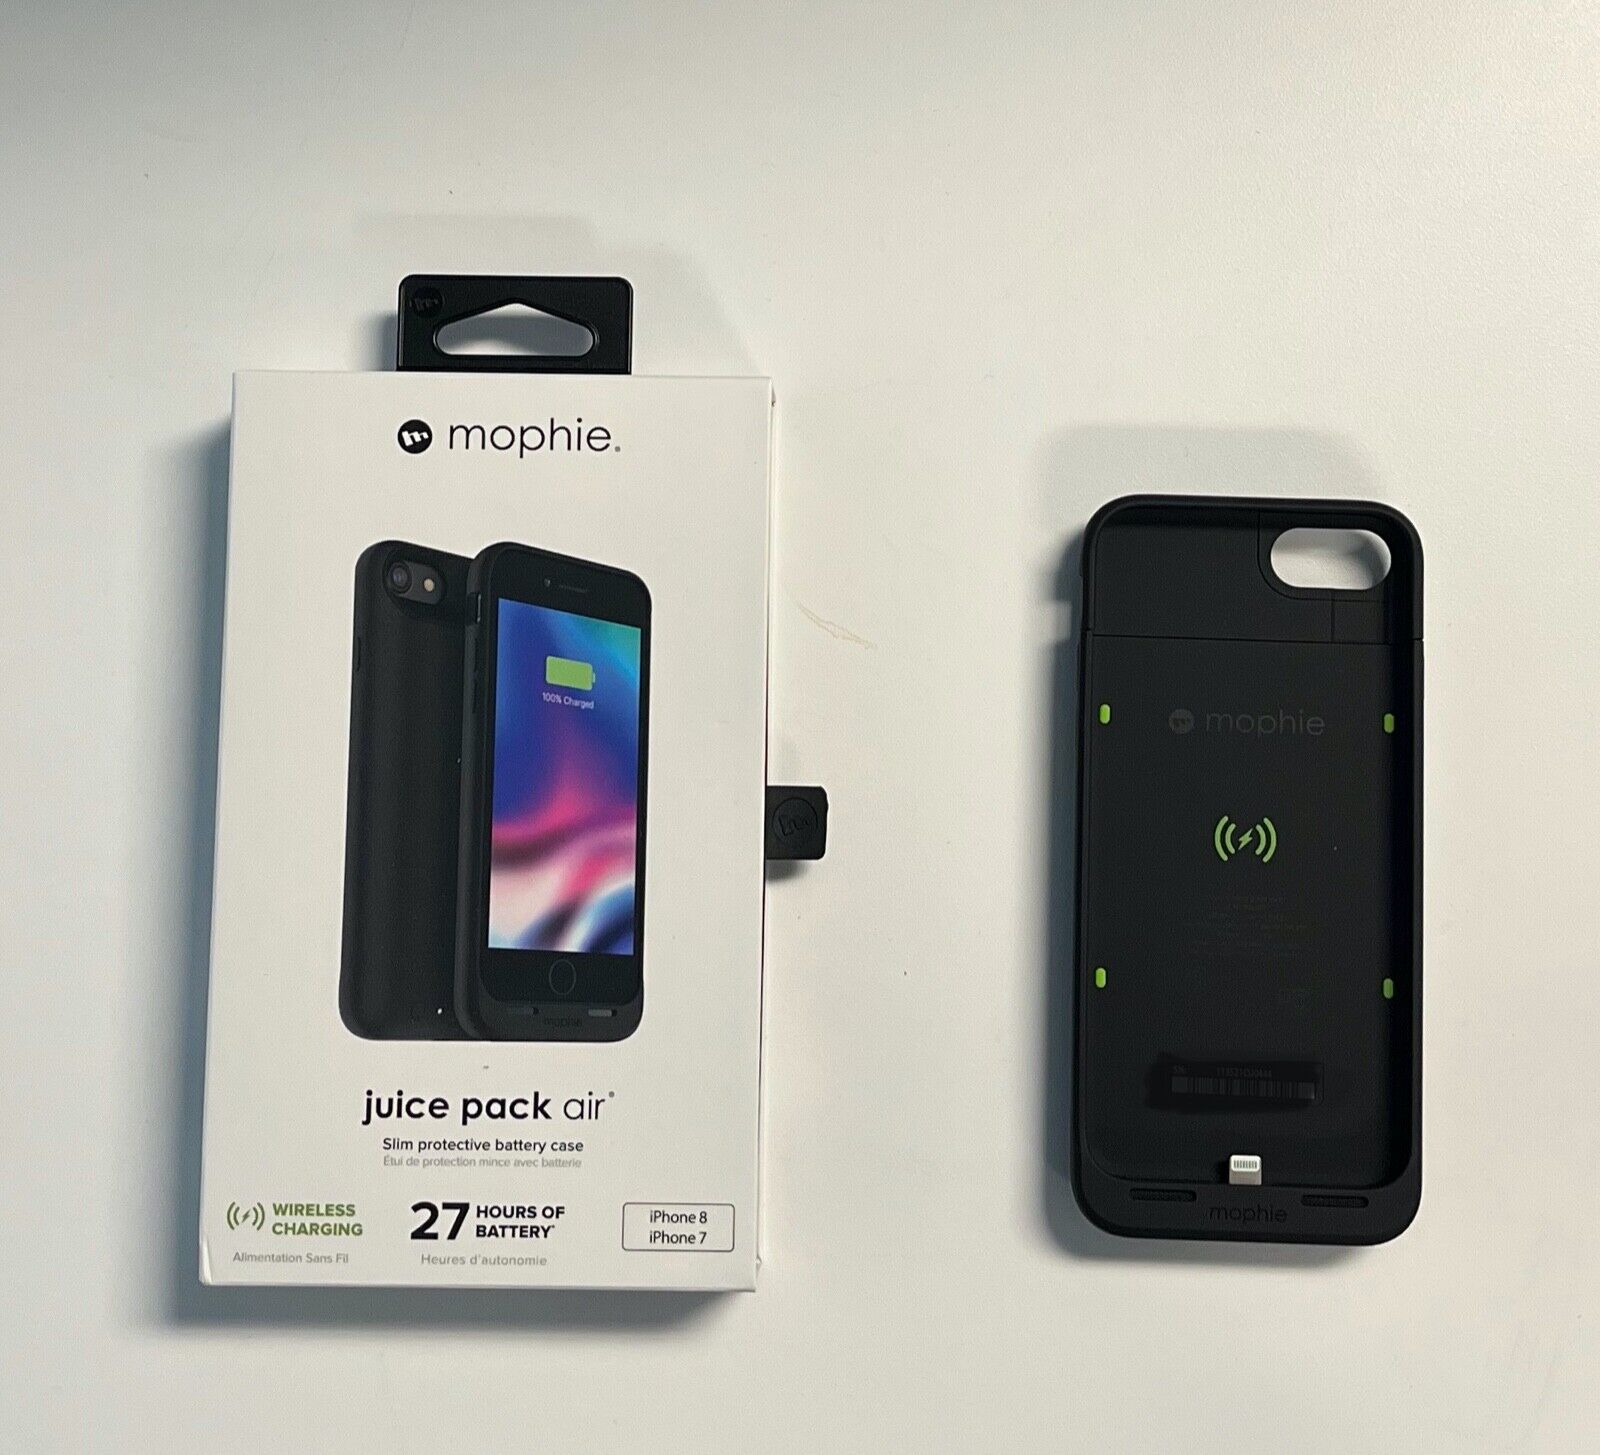 New mophie Juice Pack Air Wireless Battery Case for iPhone 8, 7, Black Color